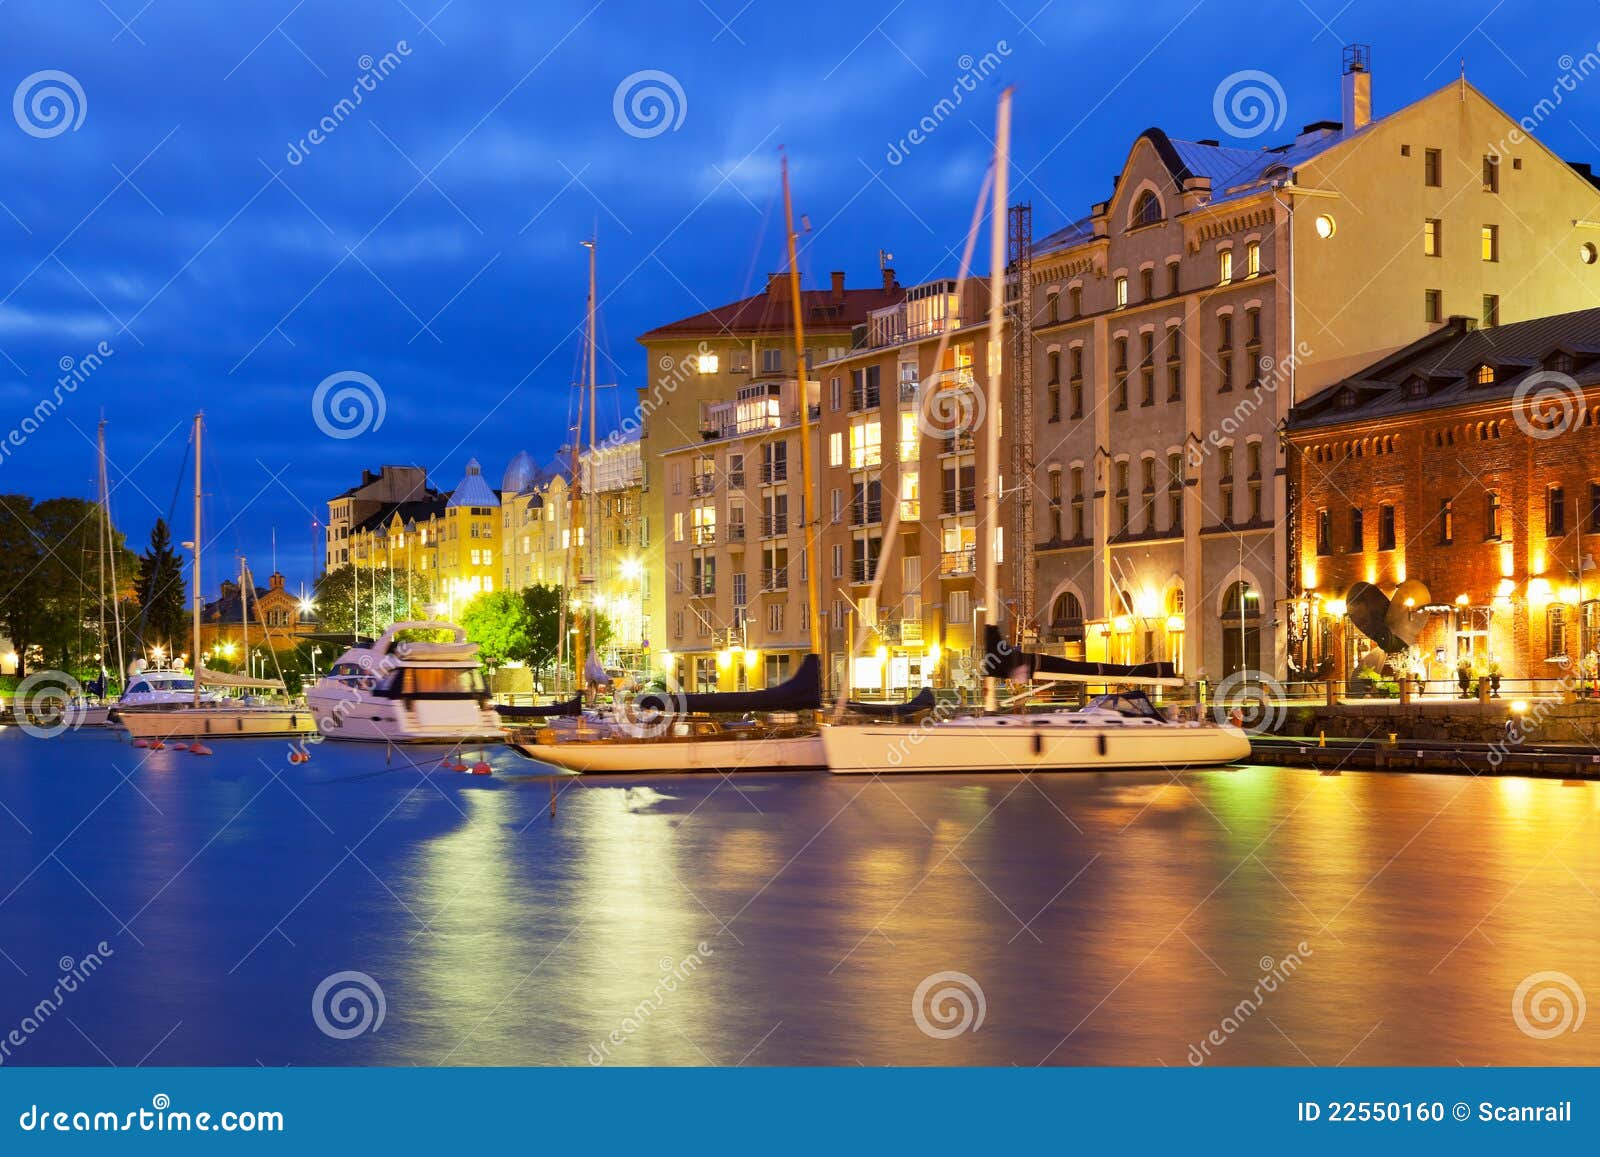 night scenery of the old town in helsinki, finland stock